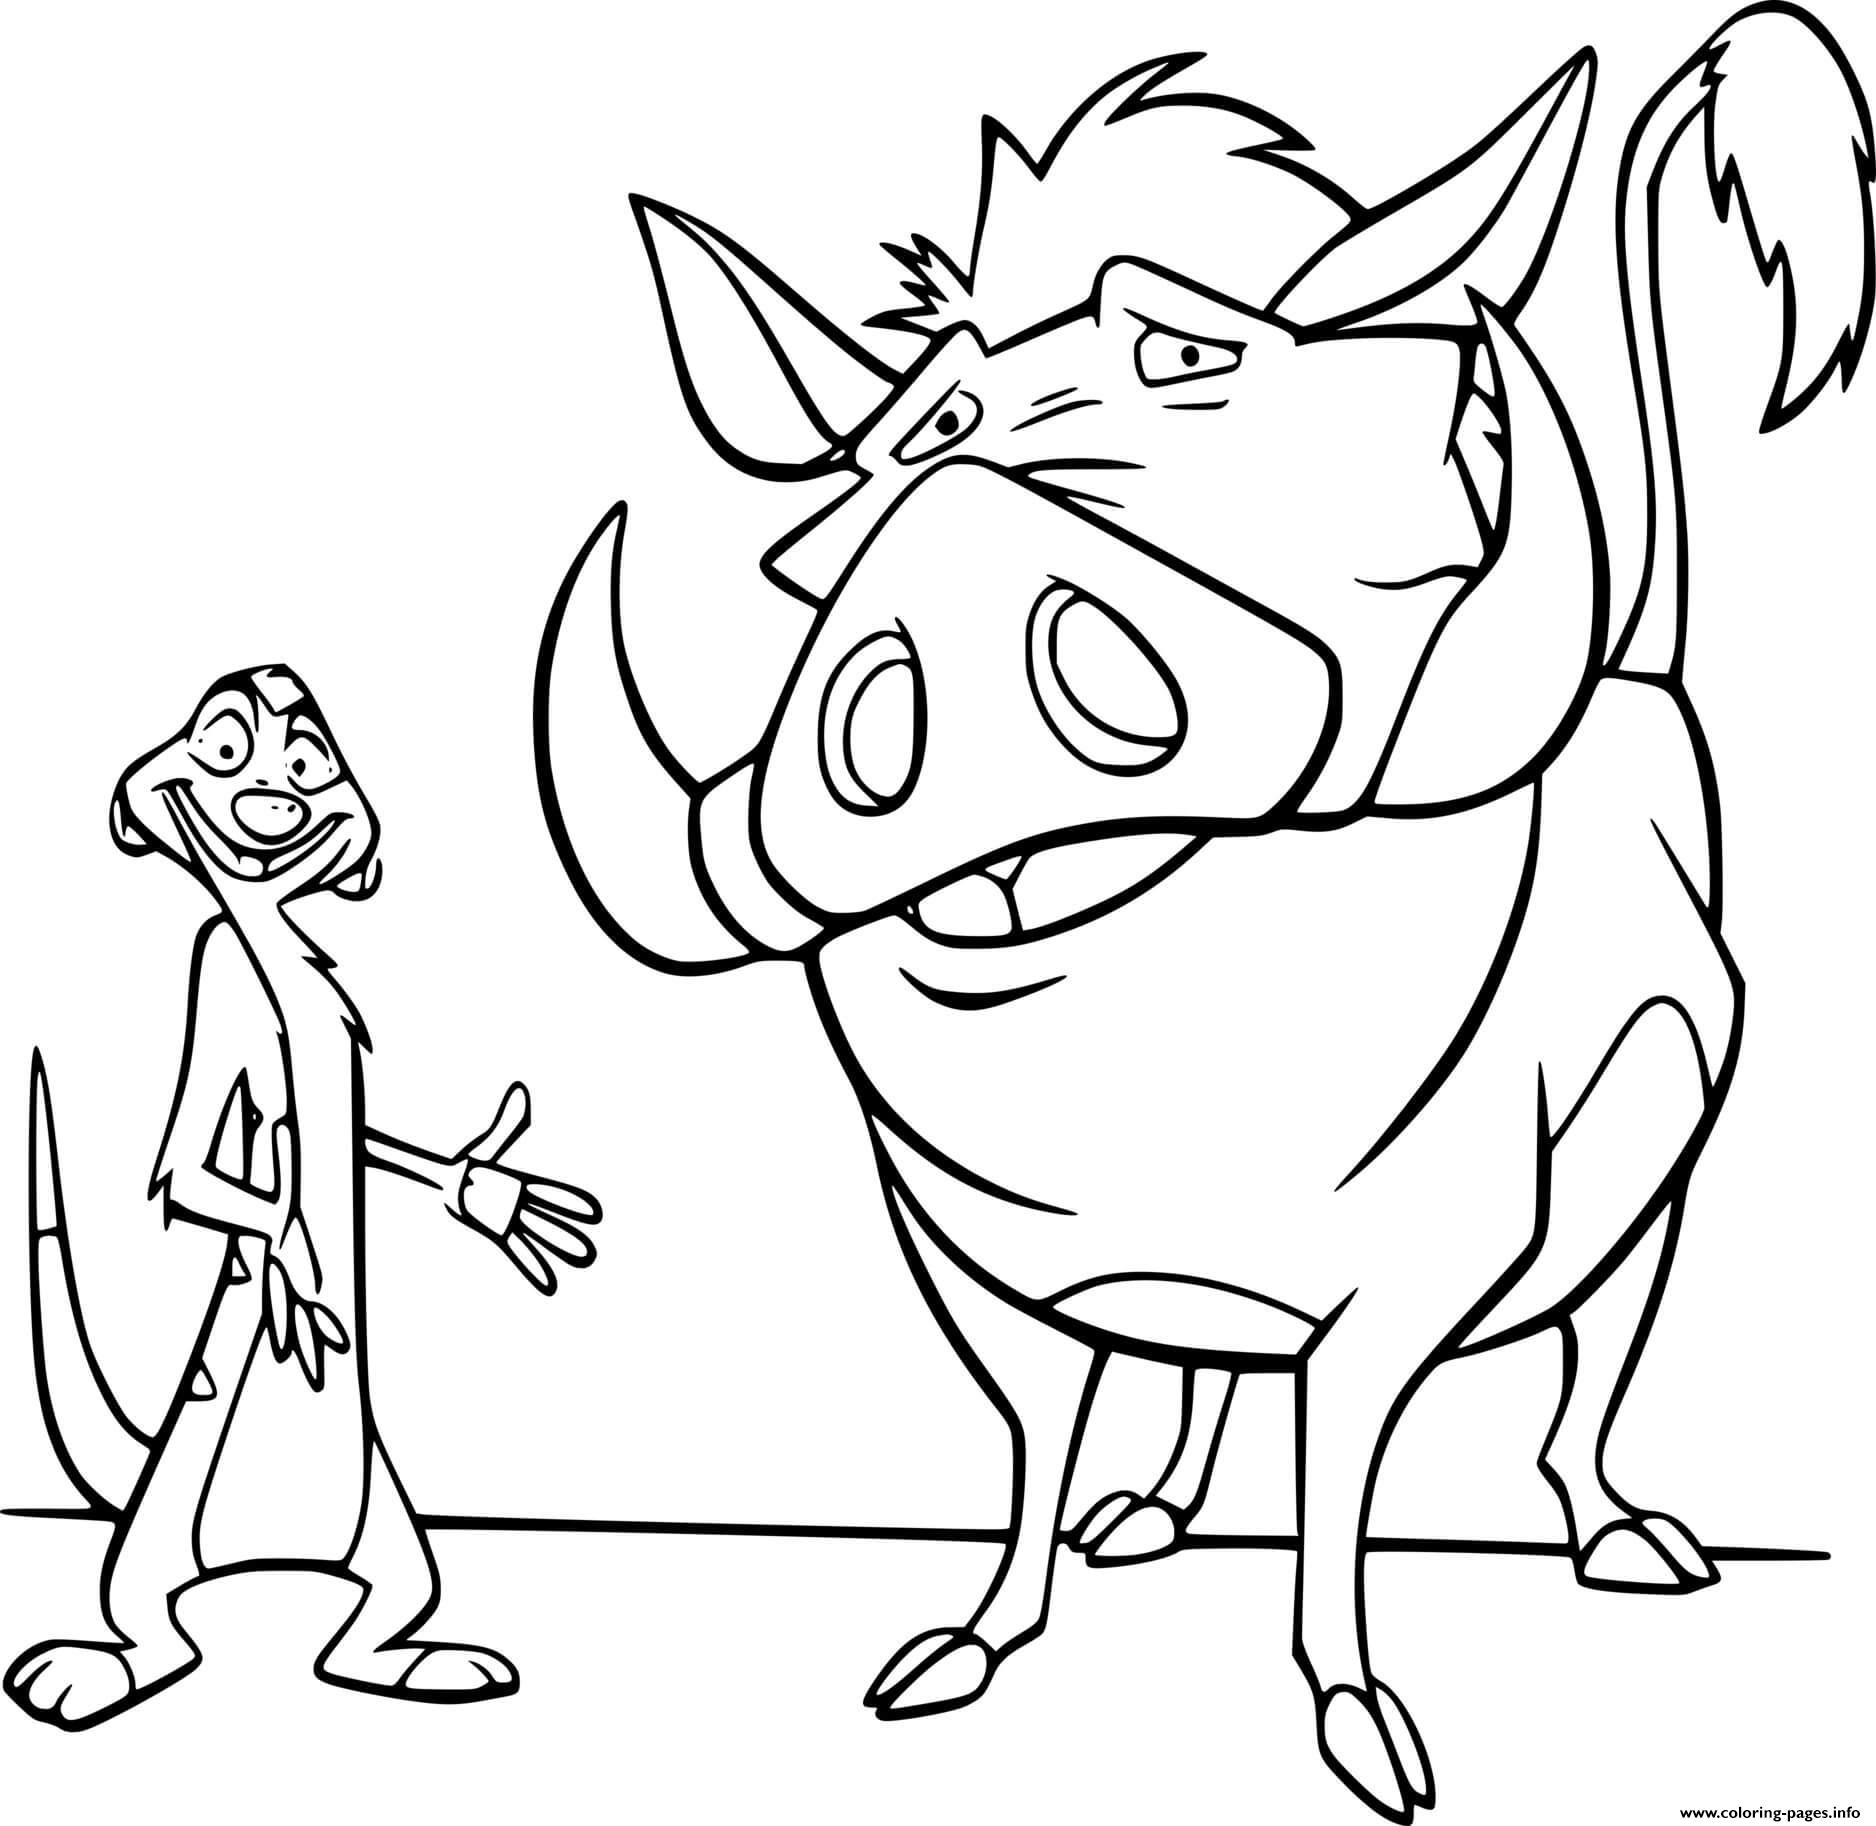 Pumbaa And Timon coloring